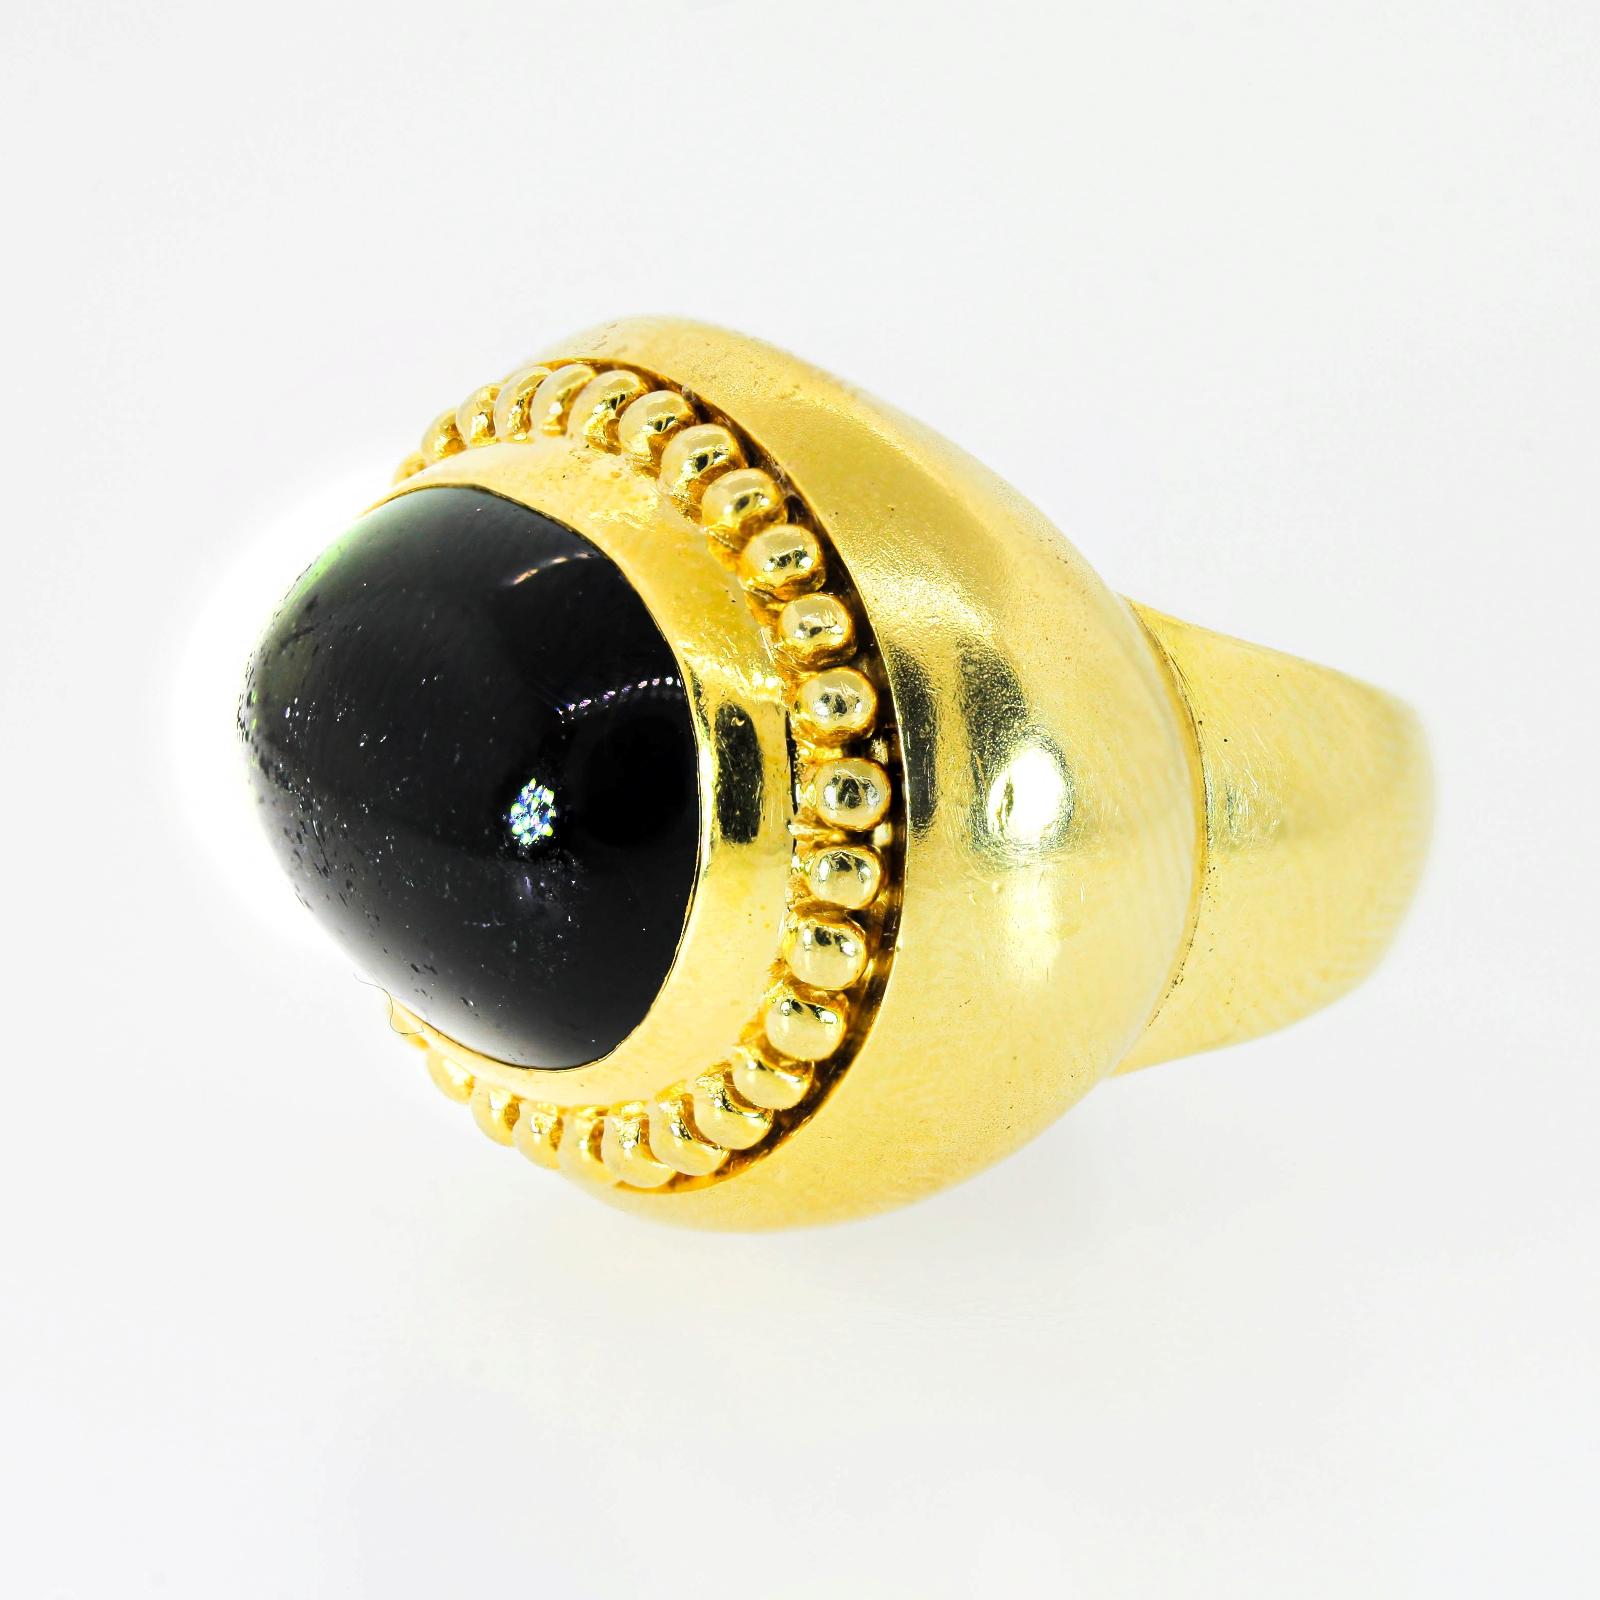 Green Tourmaline also known as Verdelite is prehaps nature's best healing gem.  This bold Cynthia Bach's 18KT yellow gold ring features an approx. 12.00 carat cabochon green Tourmaline, measuring 16.80 x 12.25 x 7.00 mm.  It is bezel set and